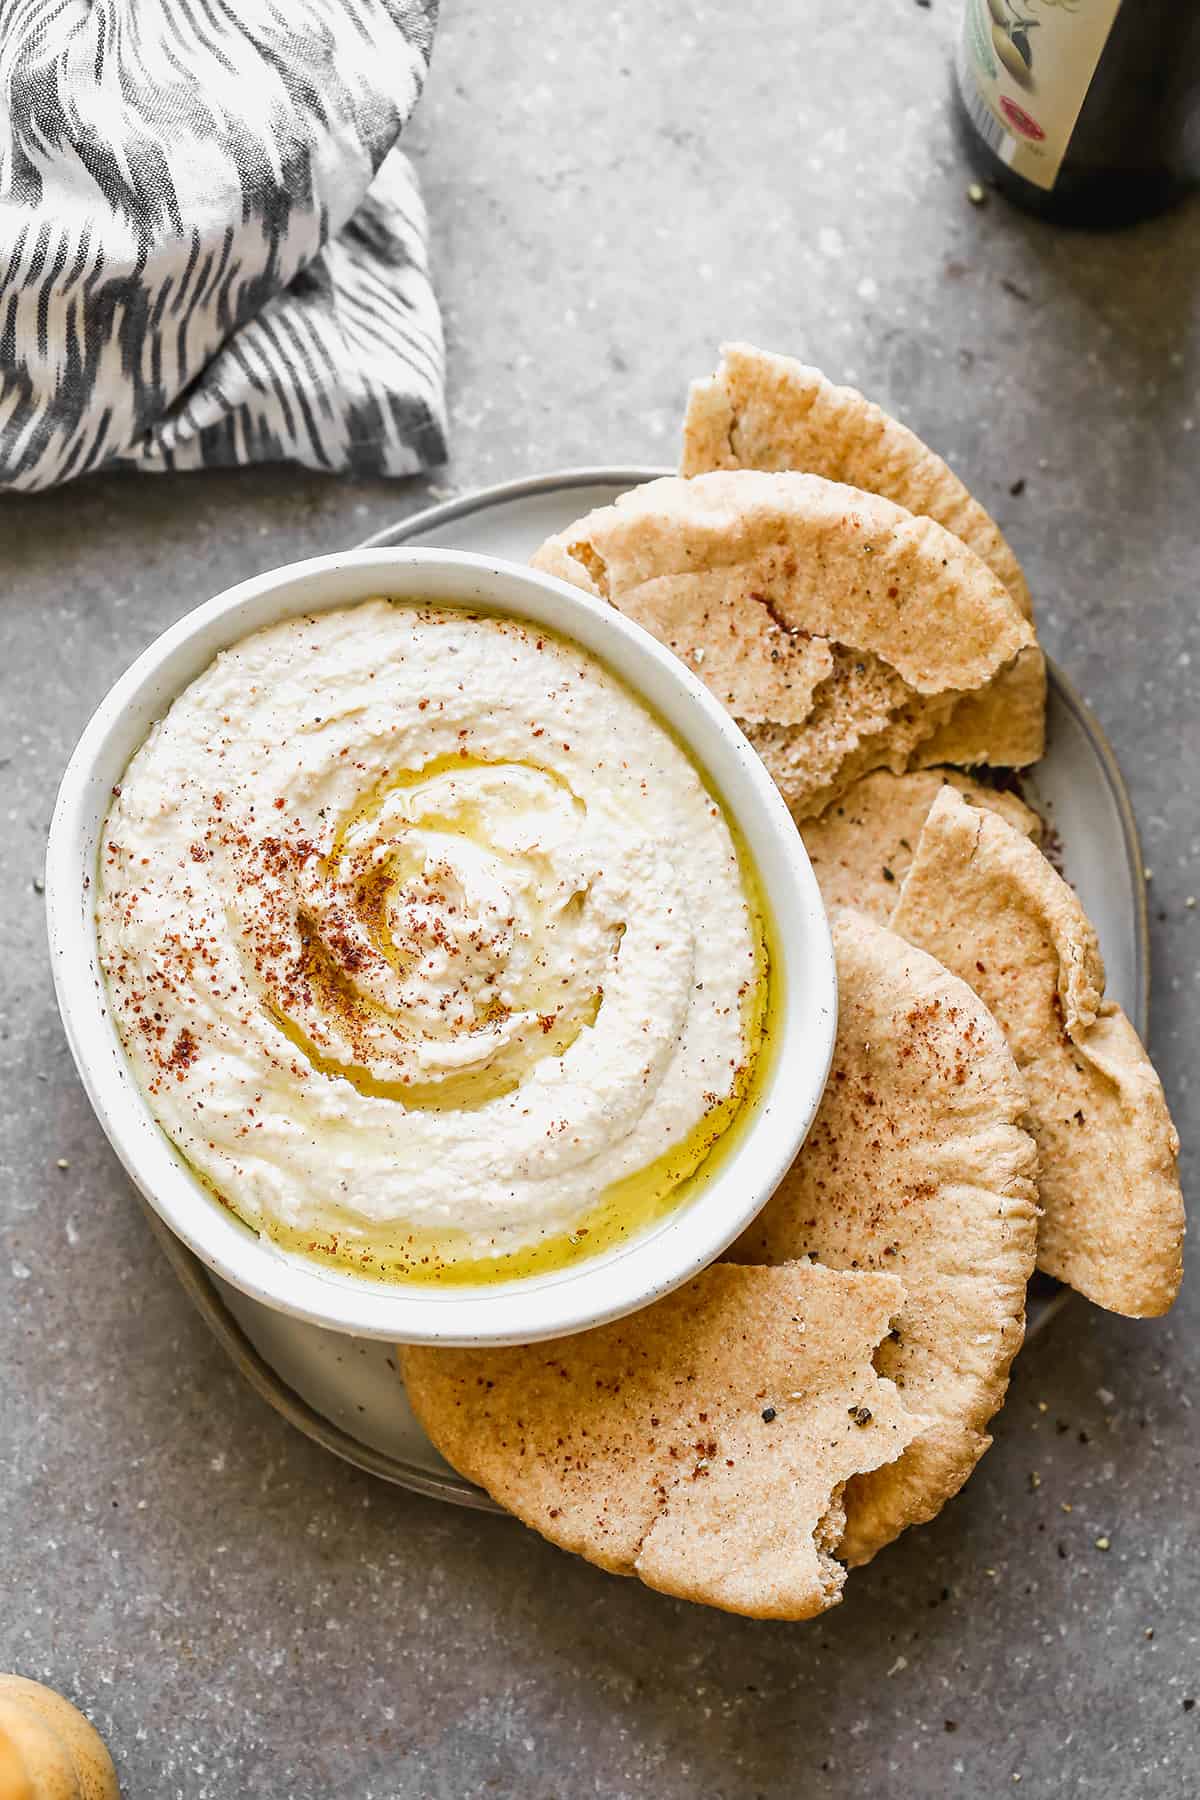 A bowl filled with homemade hummus on plate next to some broken pita bread to be dipped.